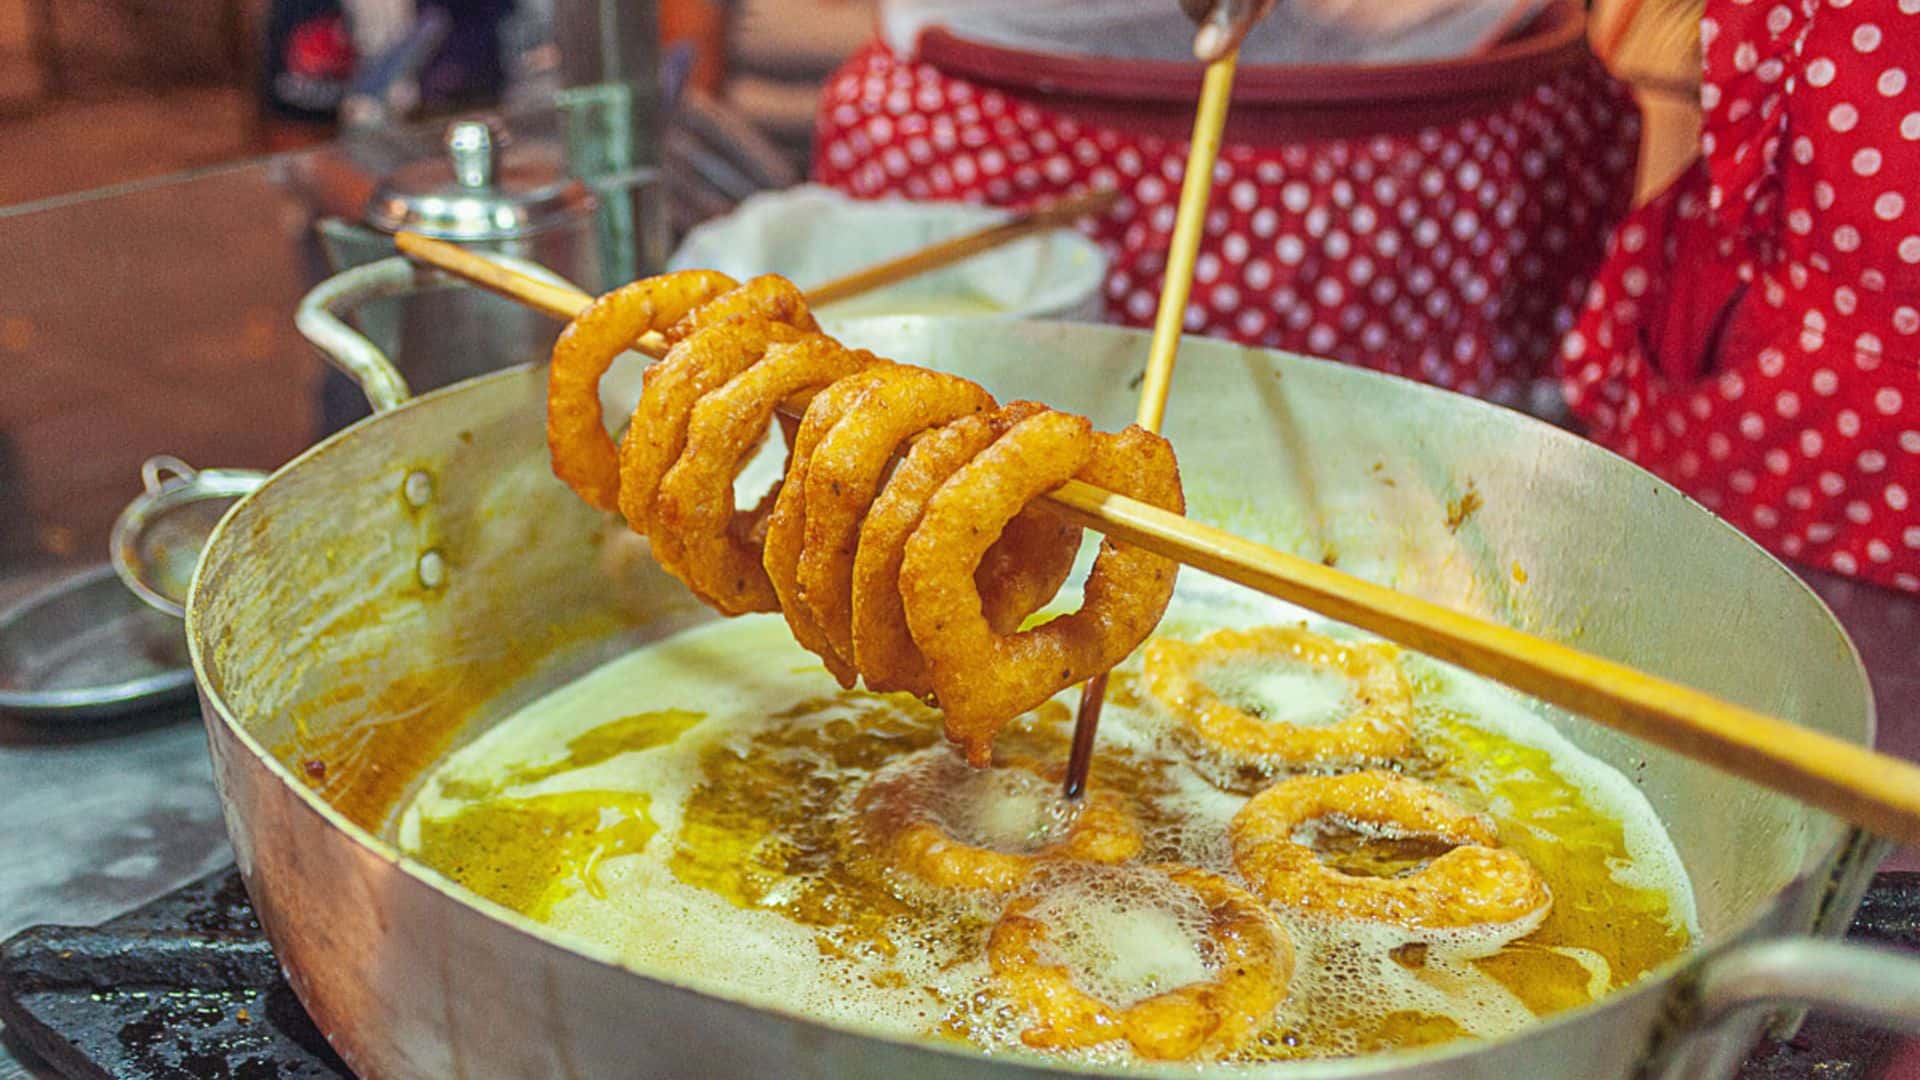 Picarones are typical sweets prepared with wheat flour mixed with pumpkin | Responsible Travel Peru